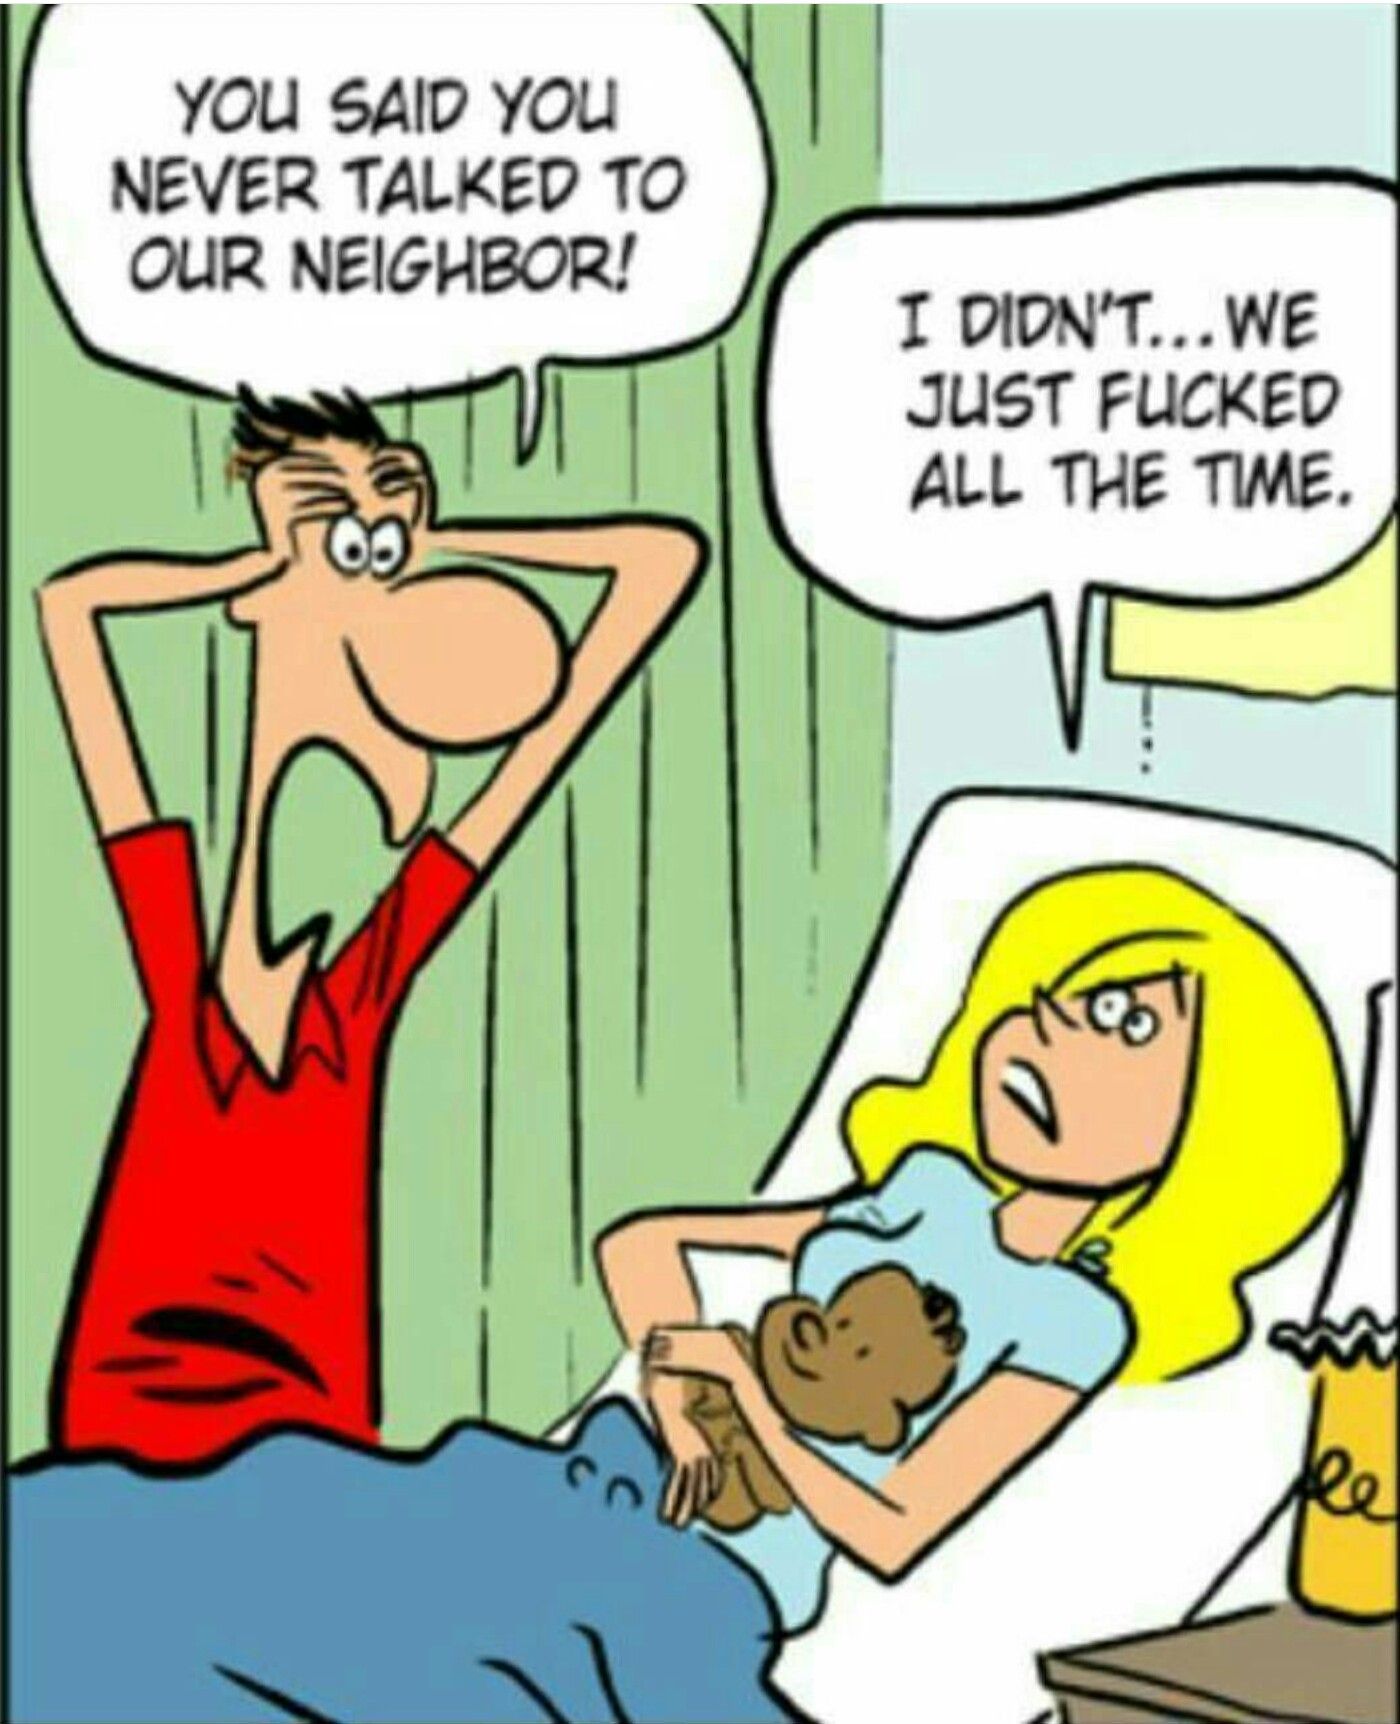 Cheating on my wife with the neighbor girl